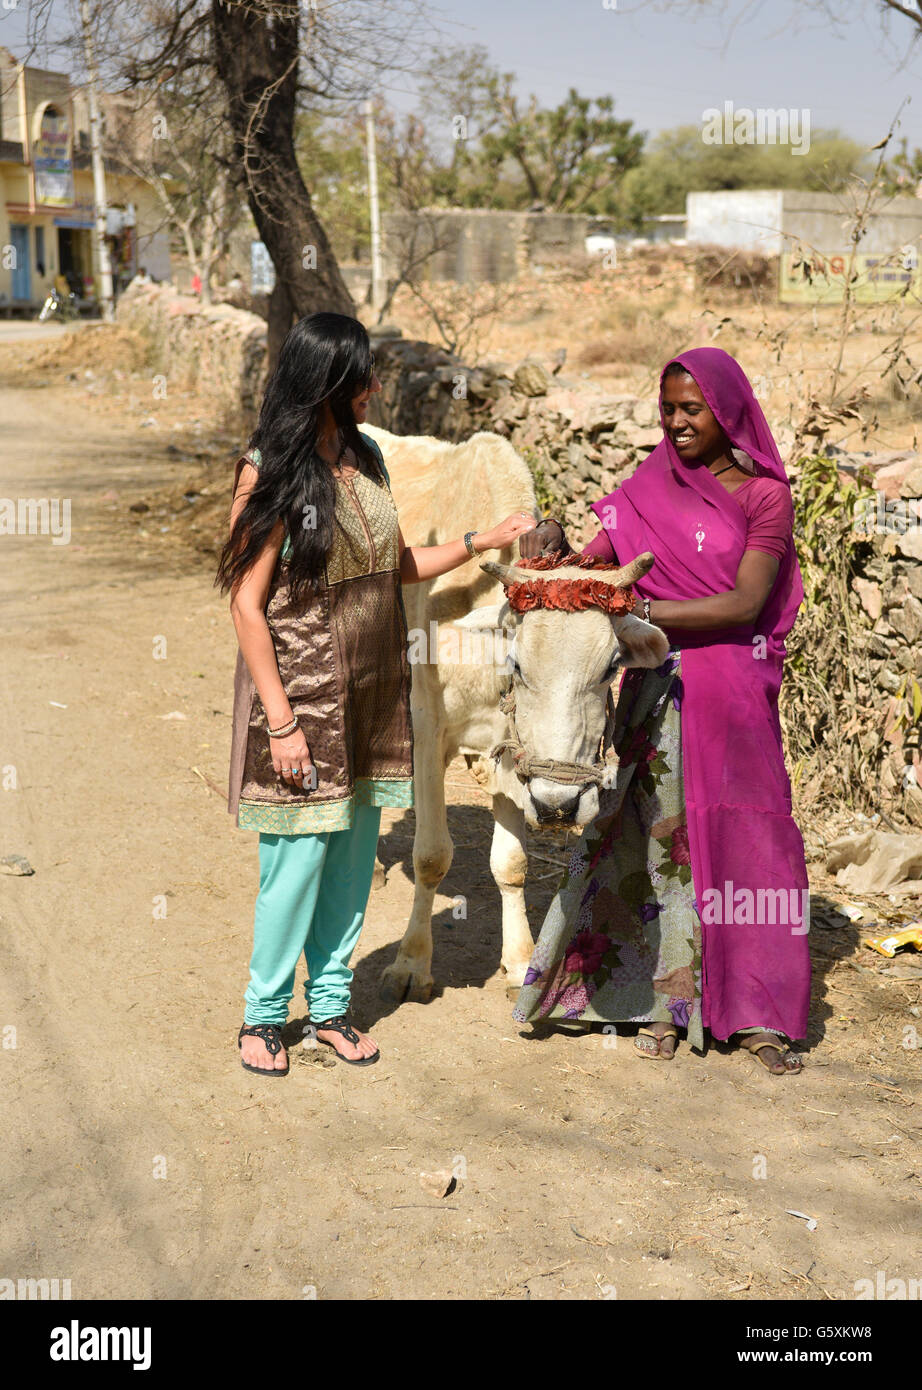 Beautiful urban woman in light Indian pyjama dress with long black hair expressing emotional farewell to her rural friend in sari outside her village. Stock Photo